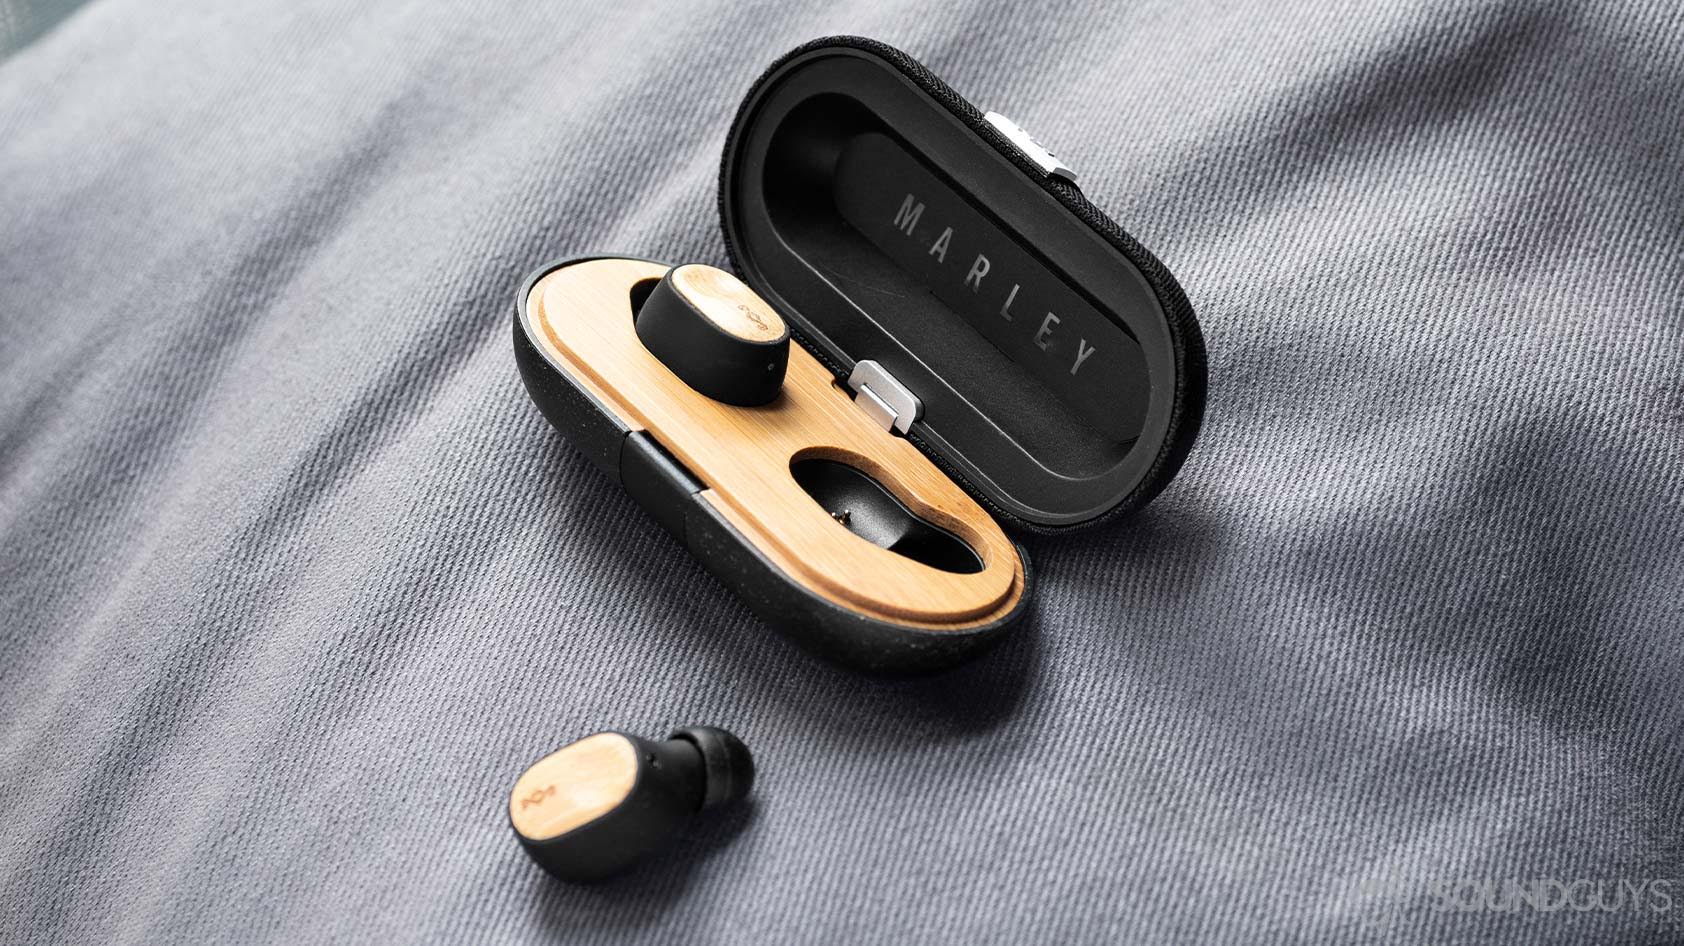 The House of Marley Liberate Air earbuds. One is in the charging case, which is open, while the other is on the grey, cloth surface.